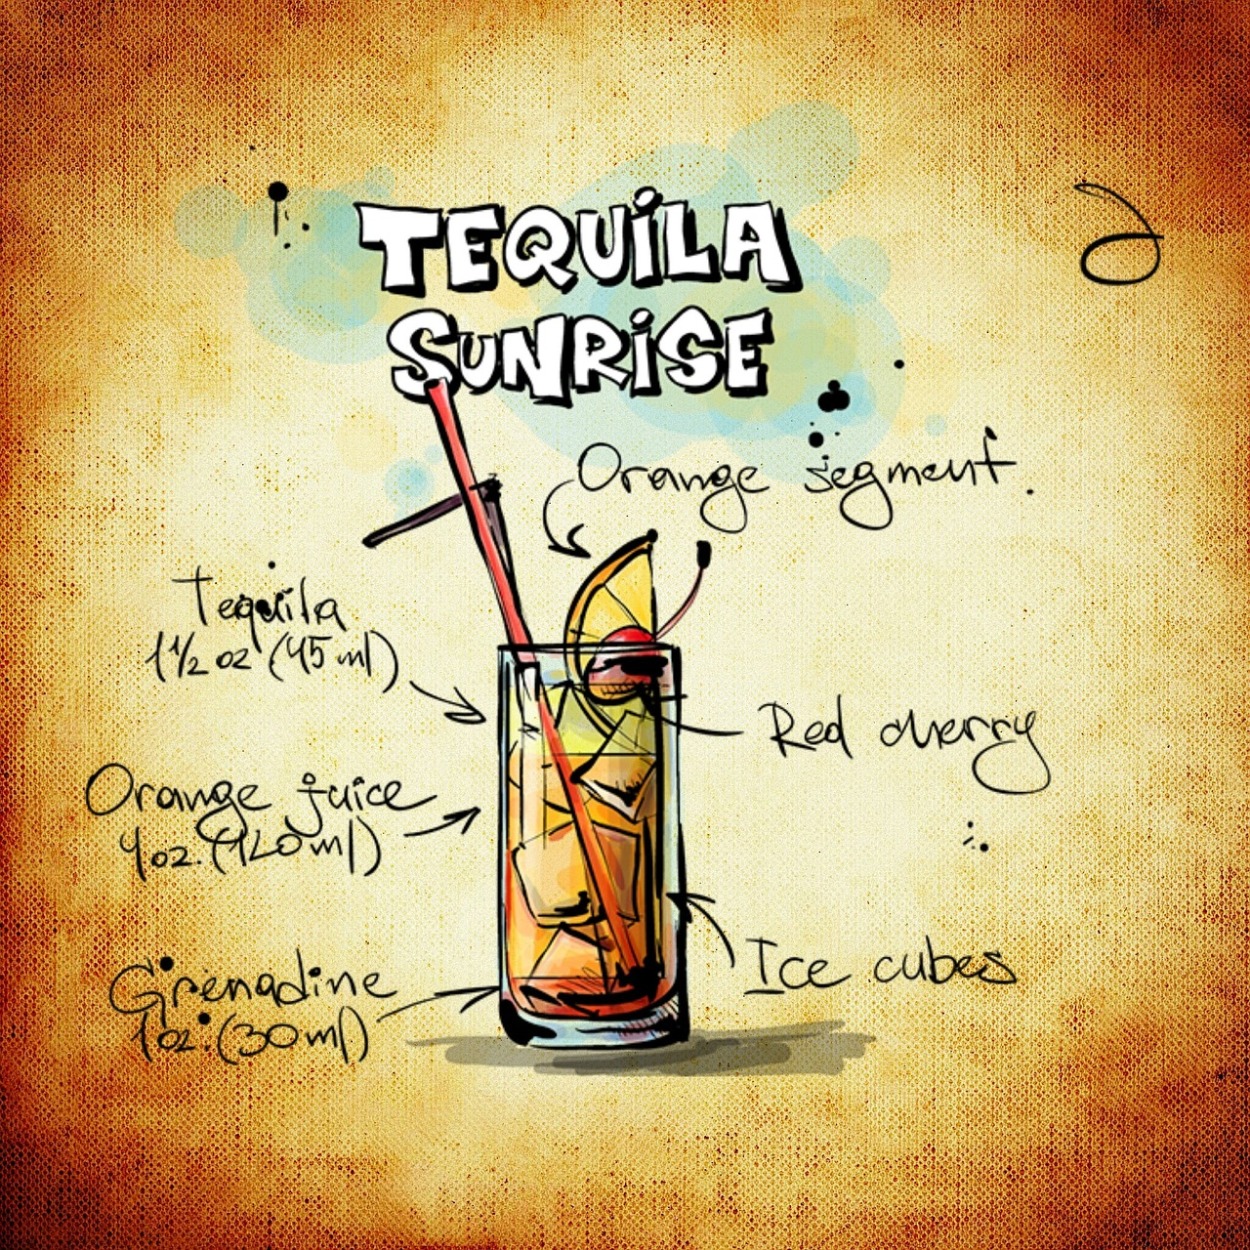 Tequila is a refreshing drink